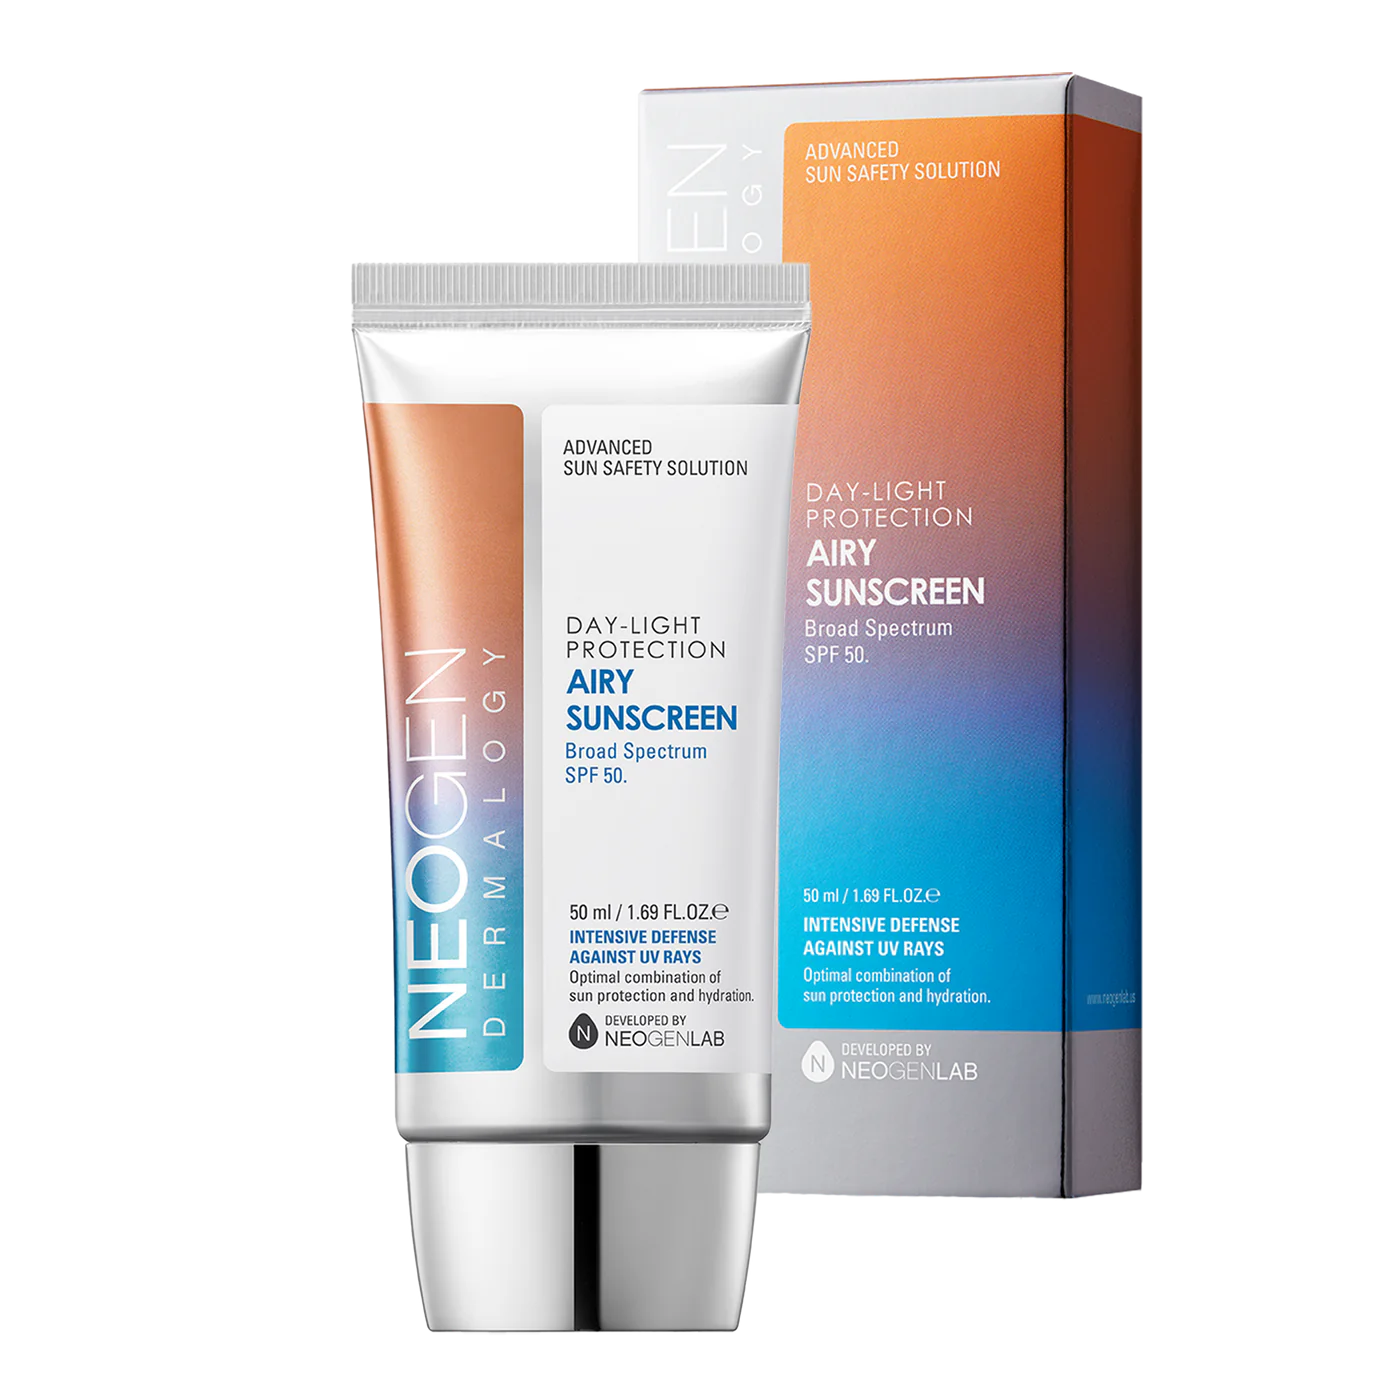 Enhance Your Routine with Dermalogy Day-Light Protection Airy Sunscreen